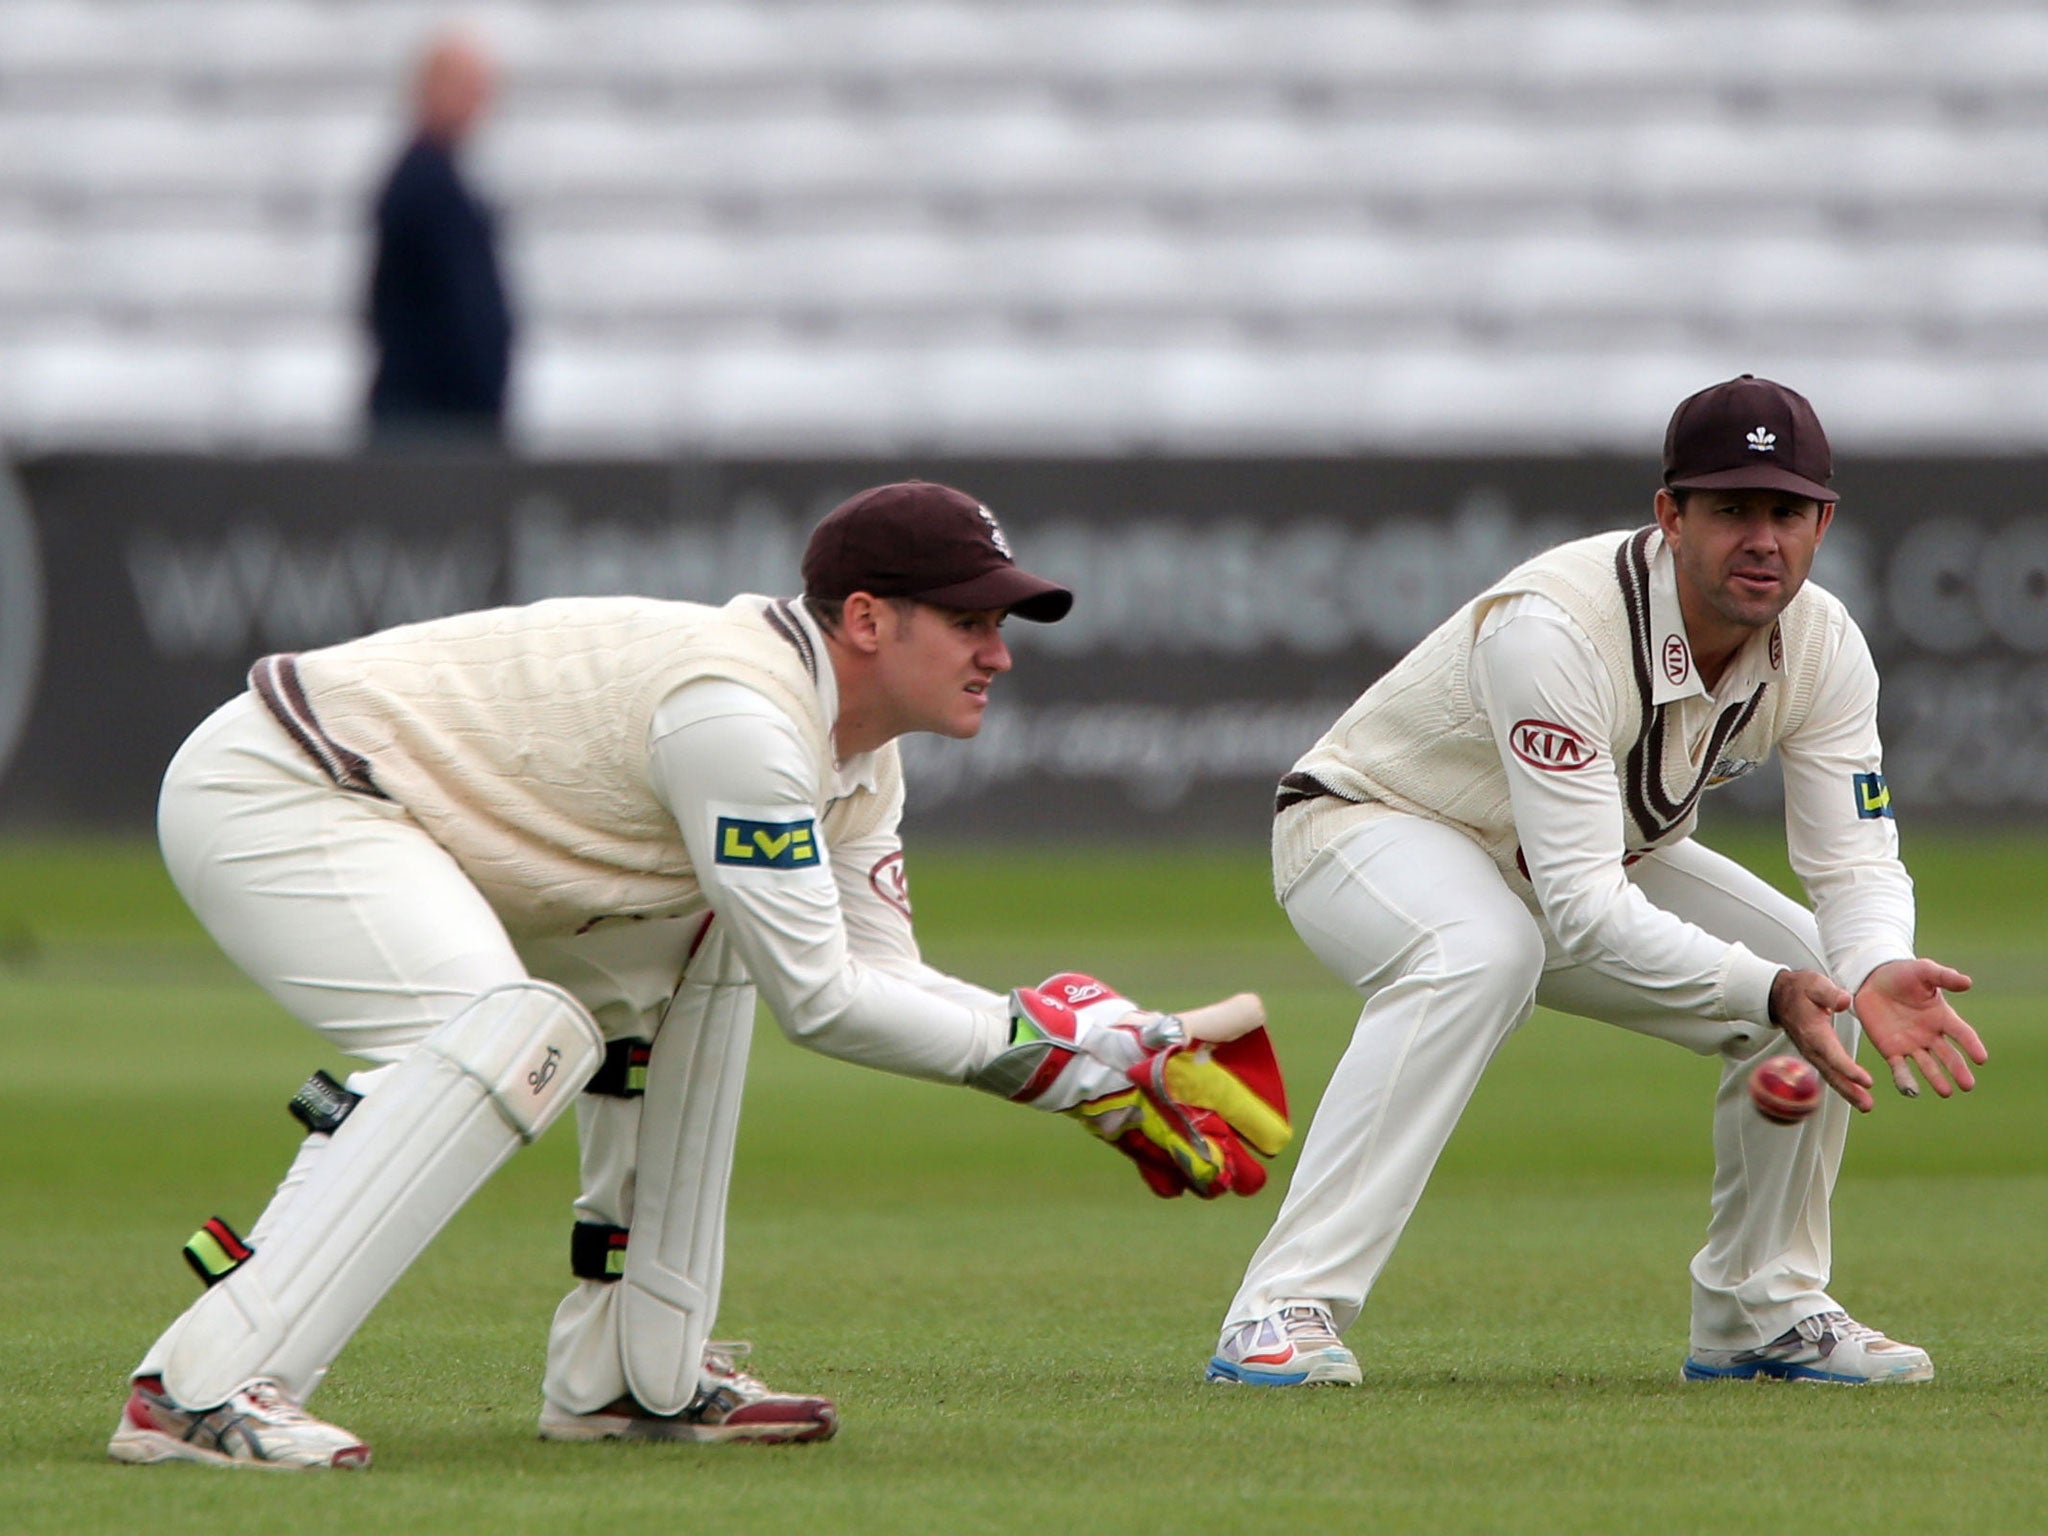 Ricky Ponting made his debut for Surrey against Derbyshire